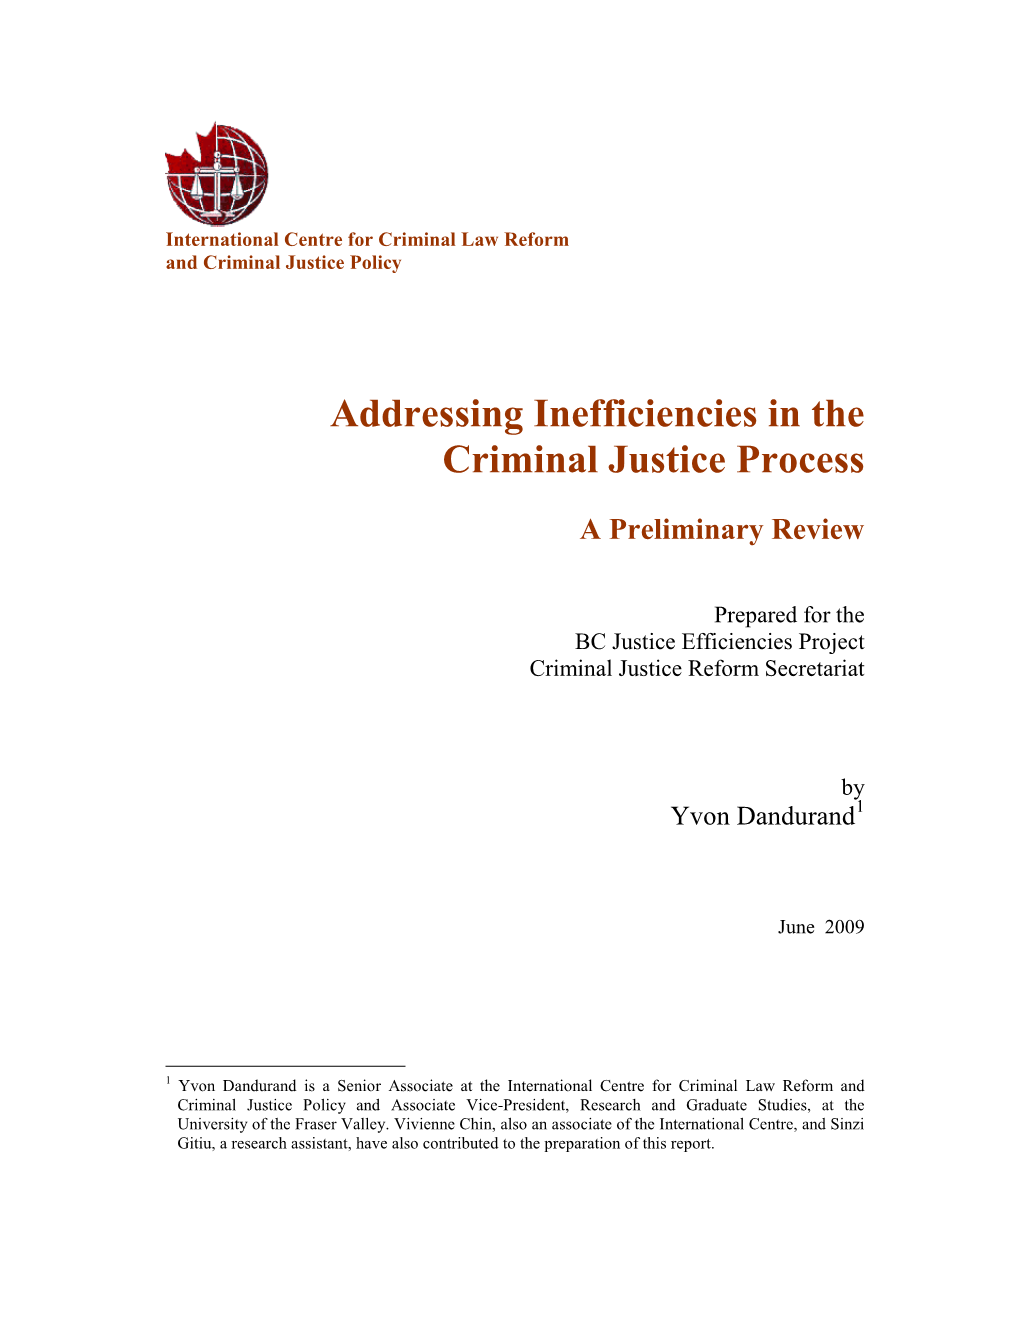 Addressing Inefficiencies in the Criminal Justice Process